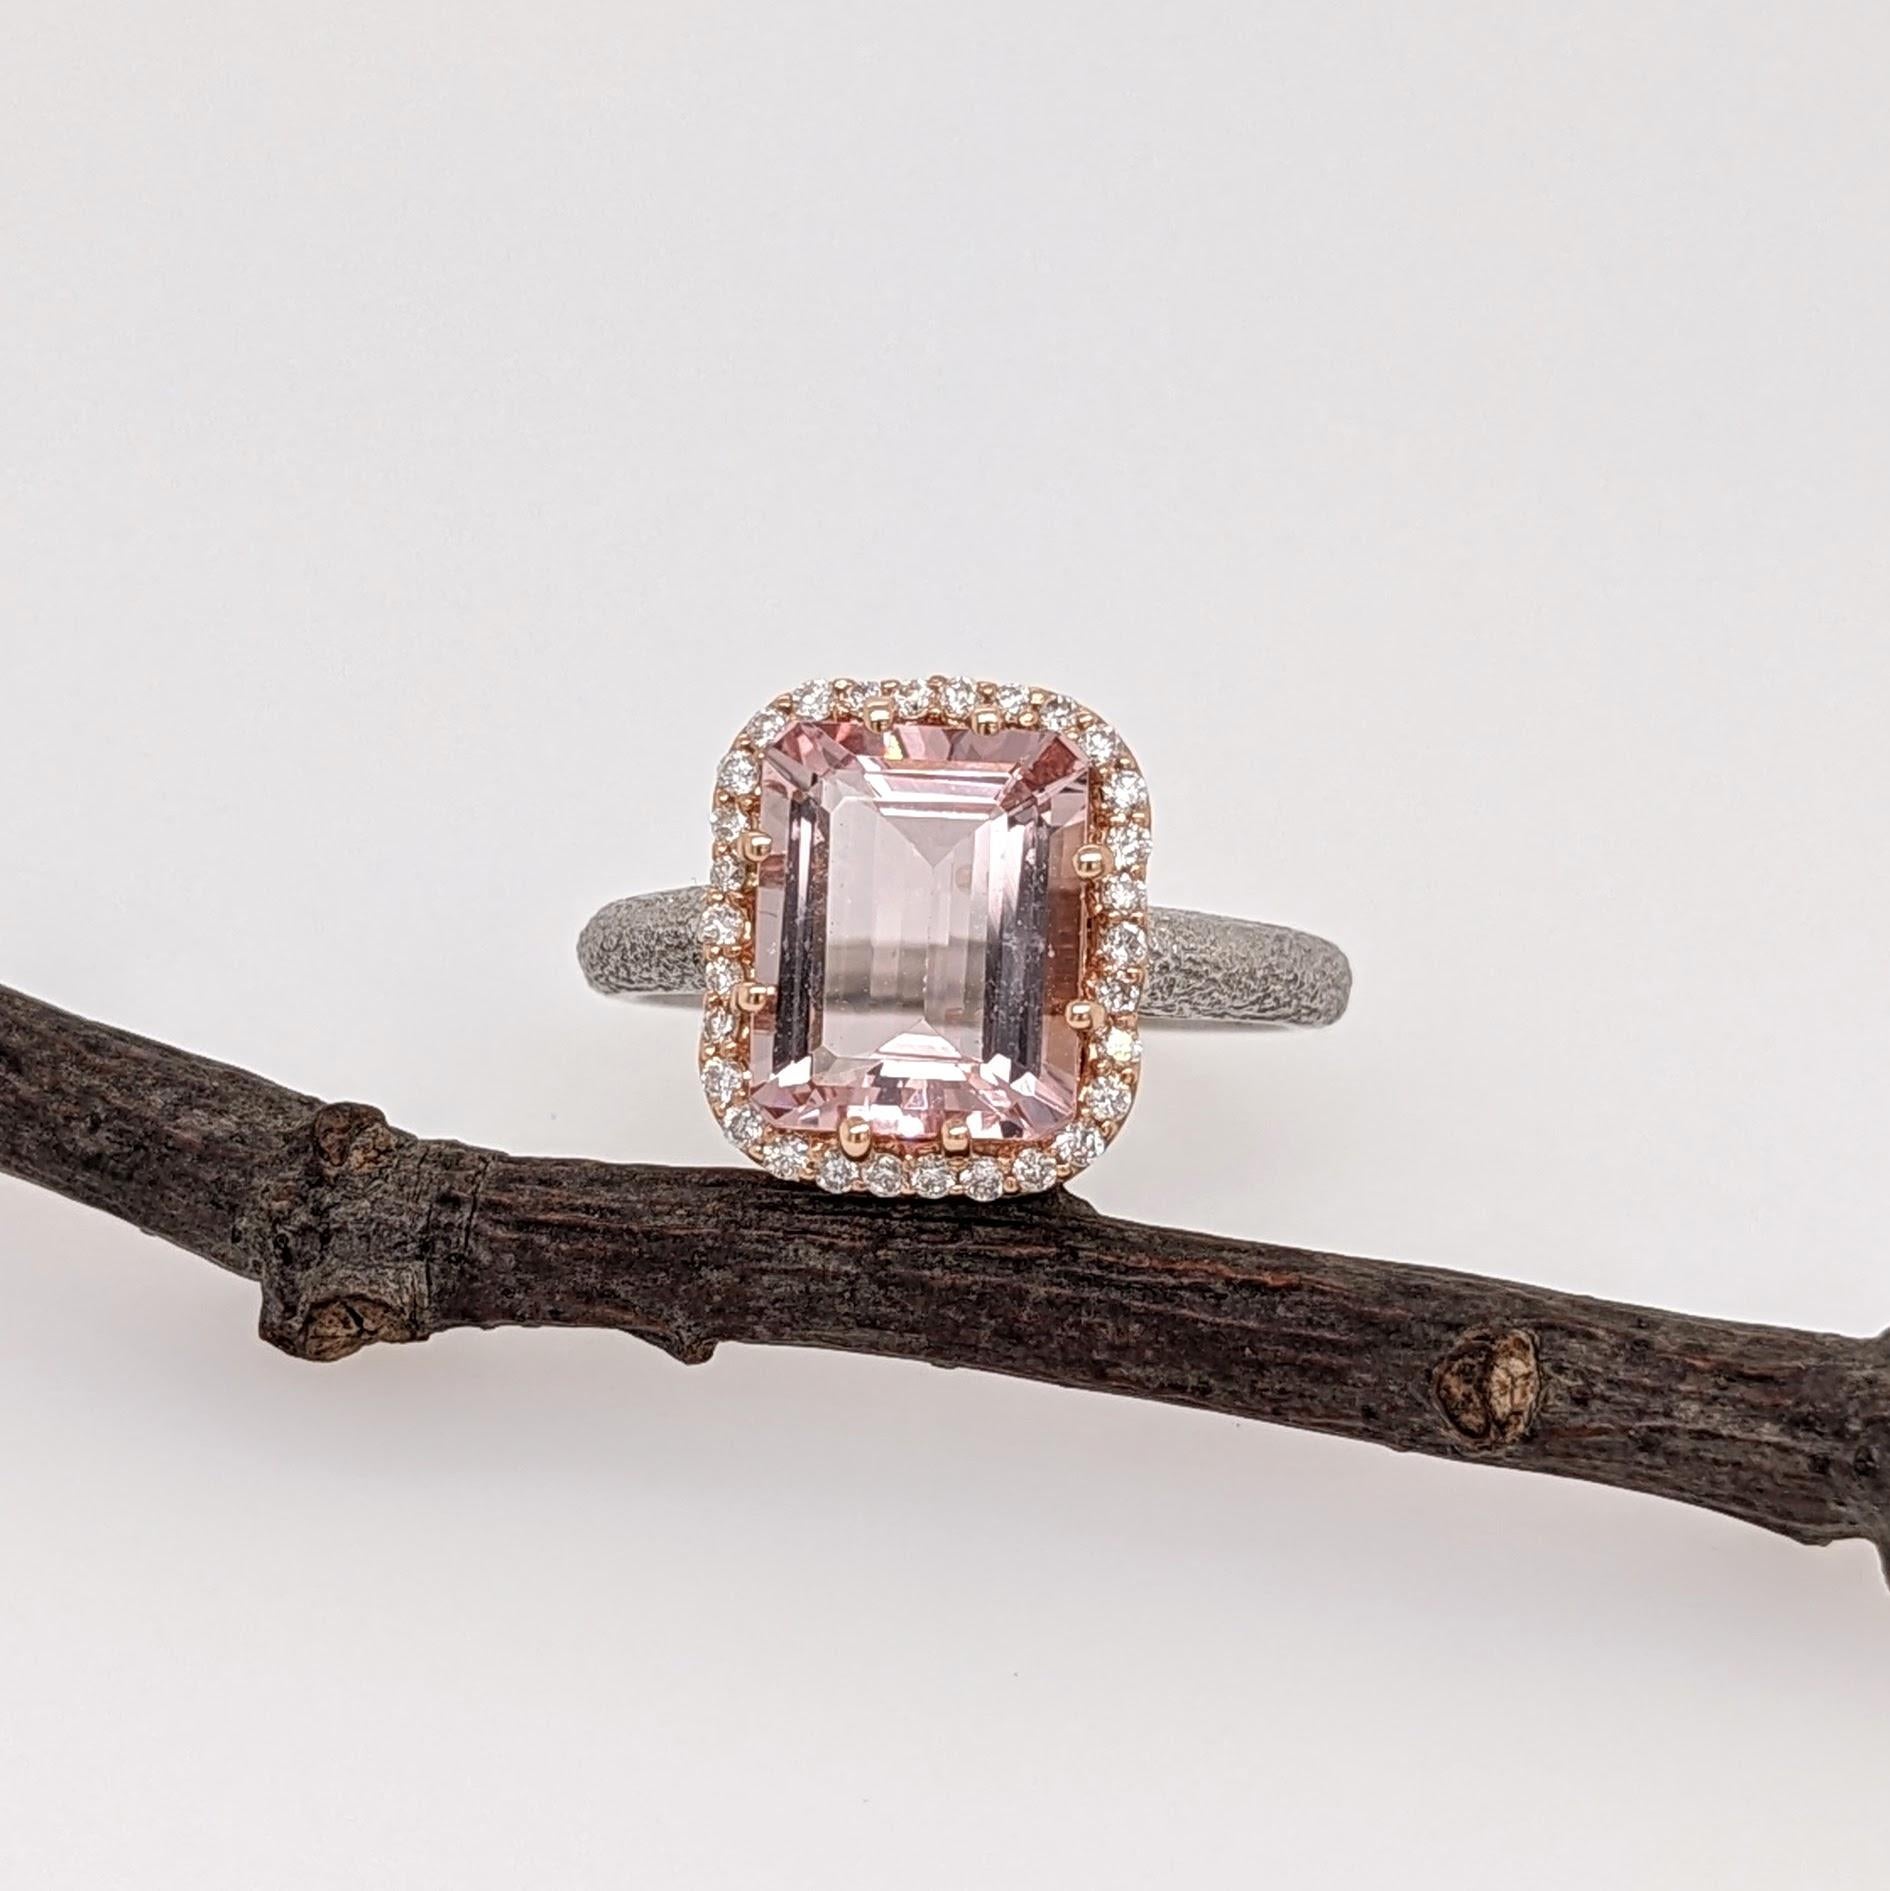 Simple and elegant textured white gold band with a gorgeous pink Morganite center stone accentuated by an all natural diamond rose gold halo. 

Perfect for all occasions such as weddings, anniversaries, Christmas, birthdays, or just